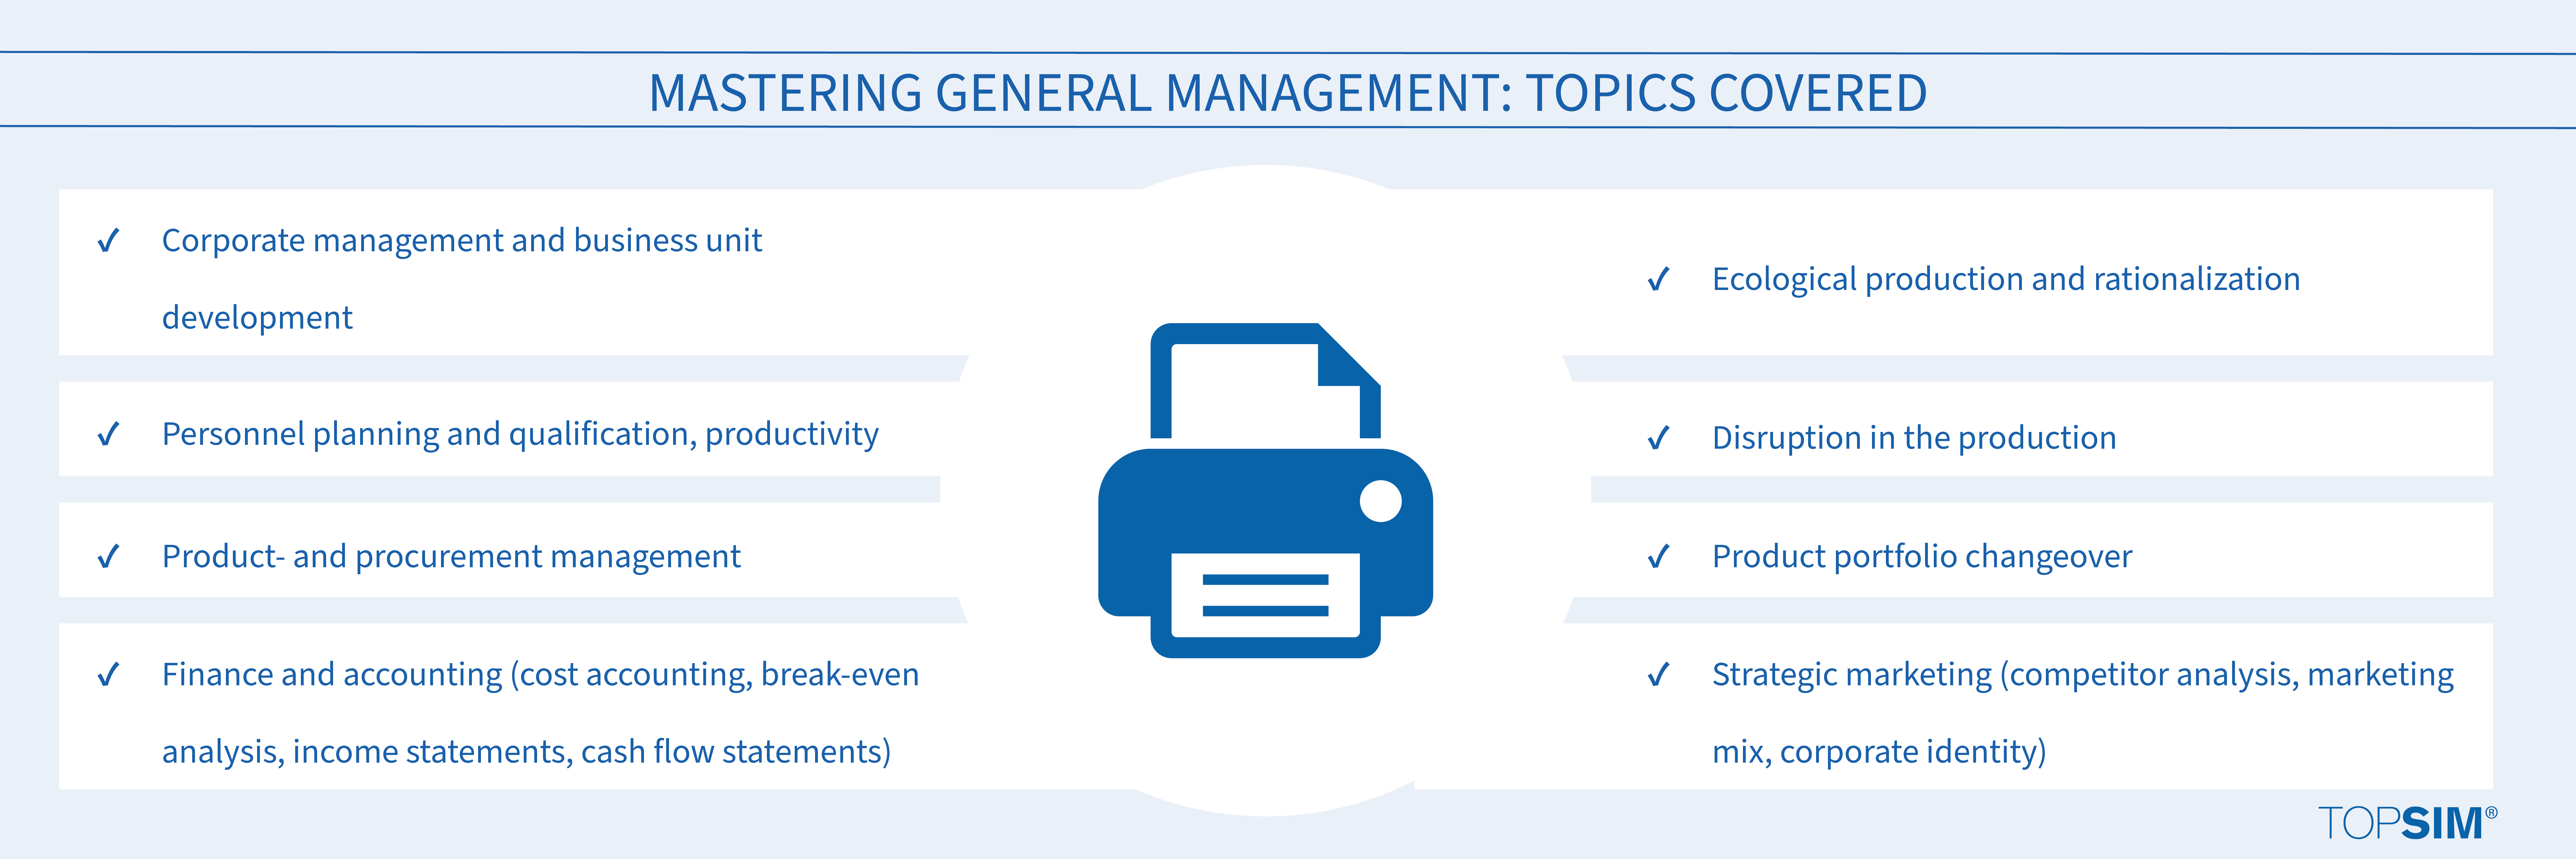 Mastering General Management Topics Covered